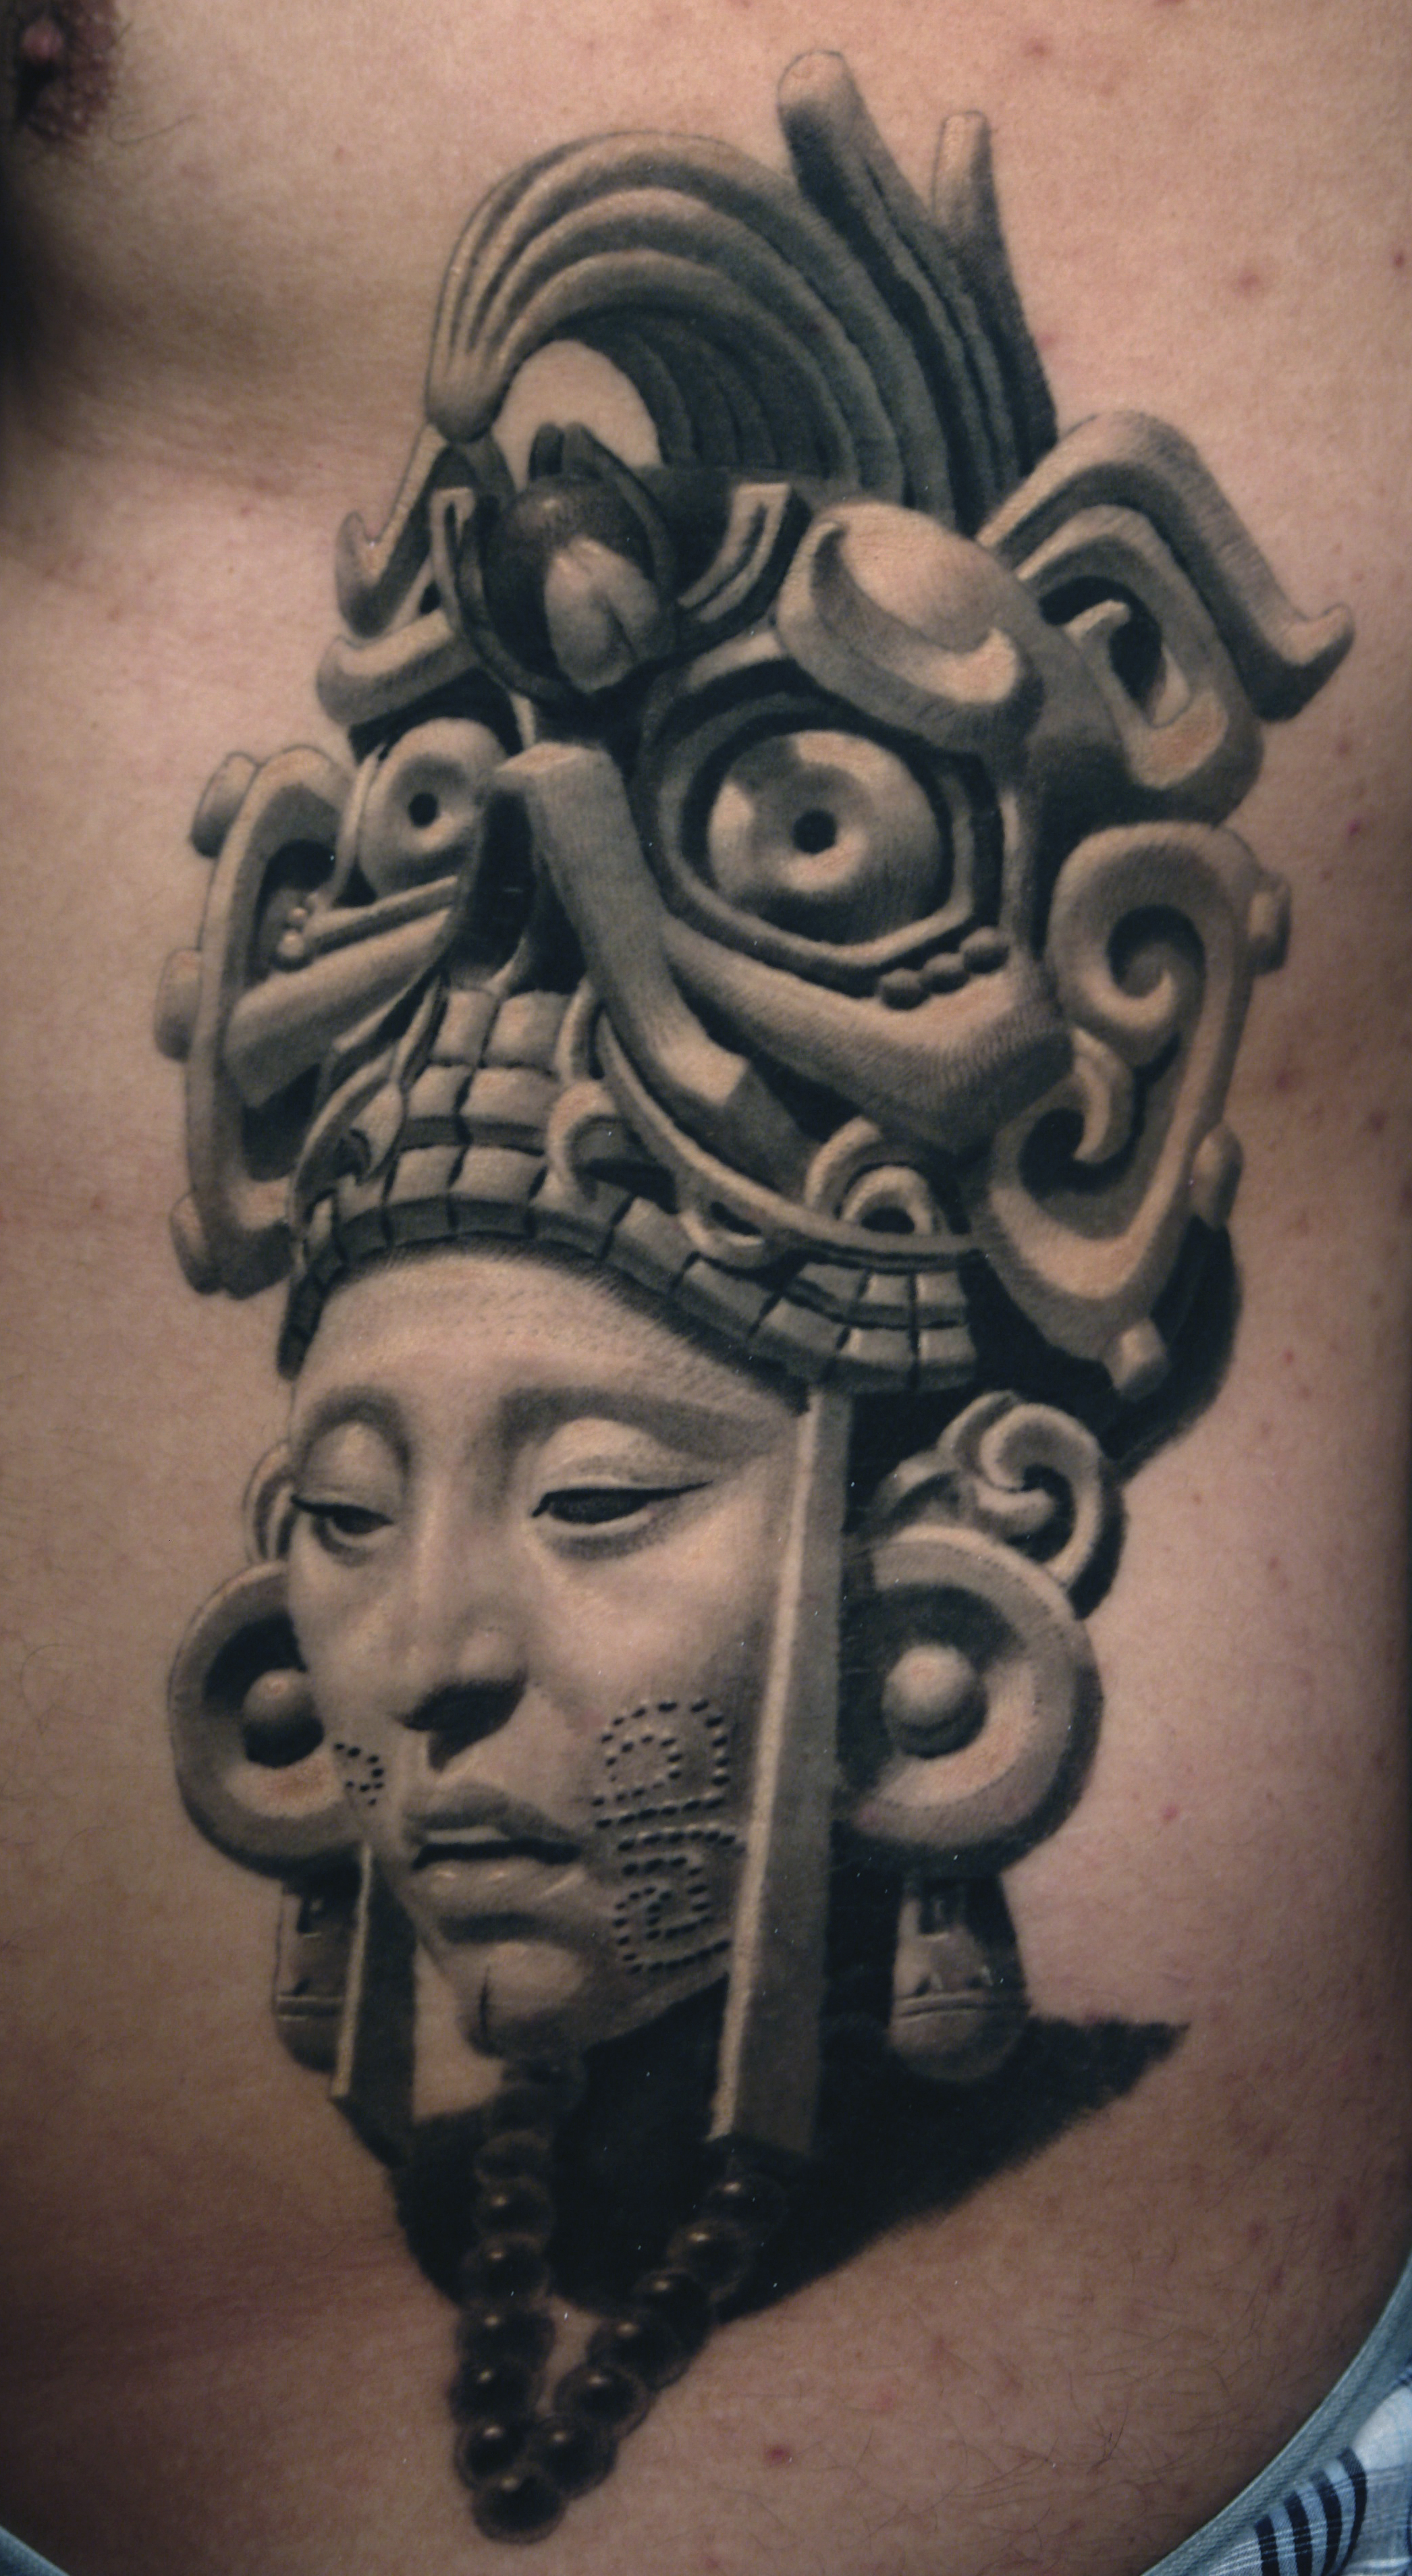 35 Aztec Tattoo Ideas for the Warrior in You